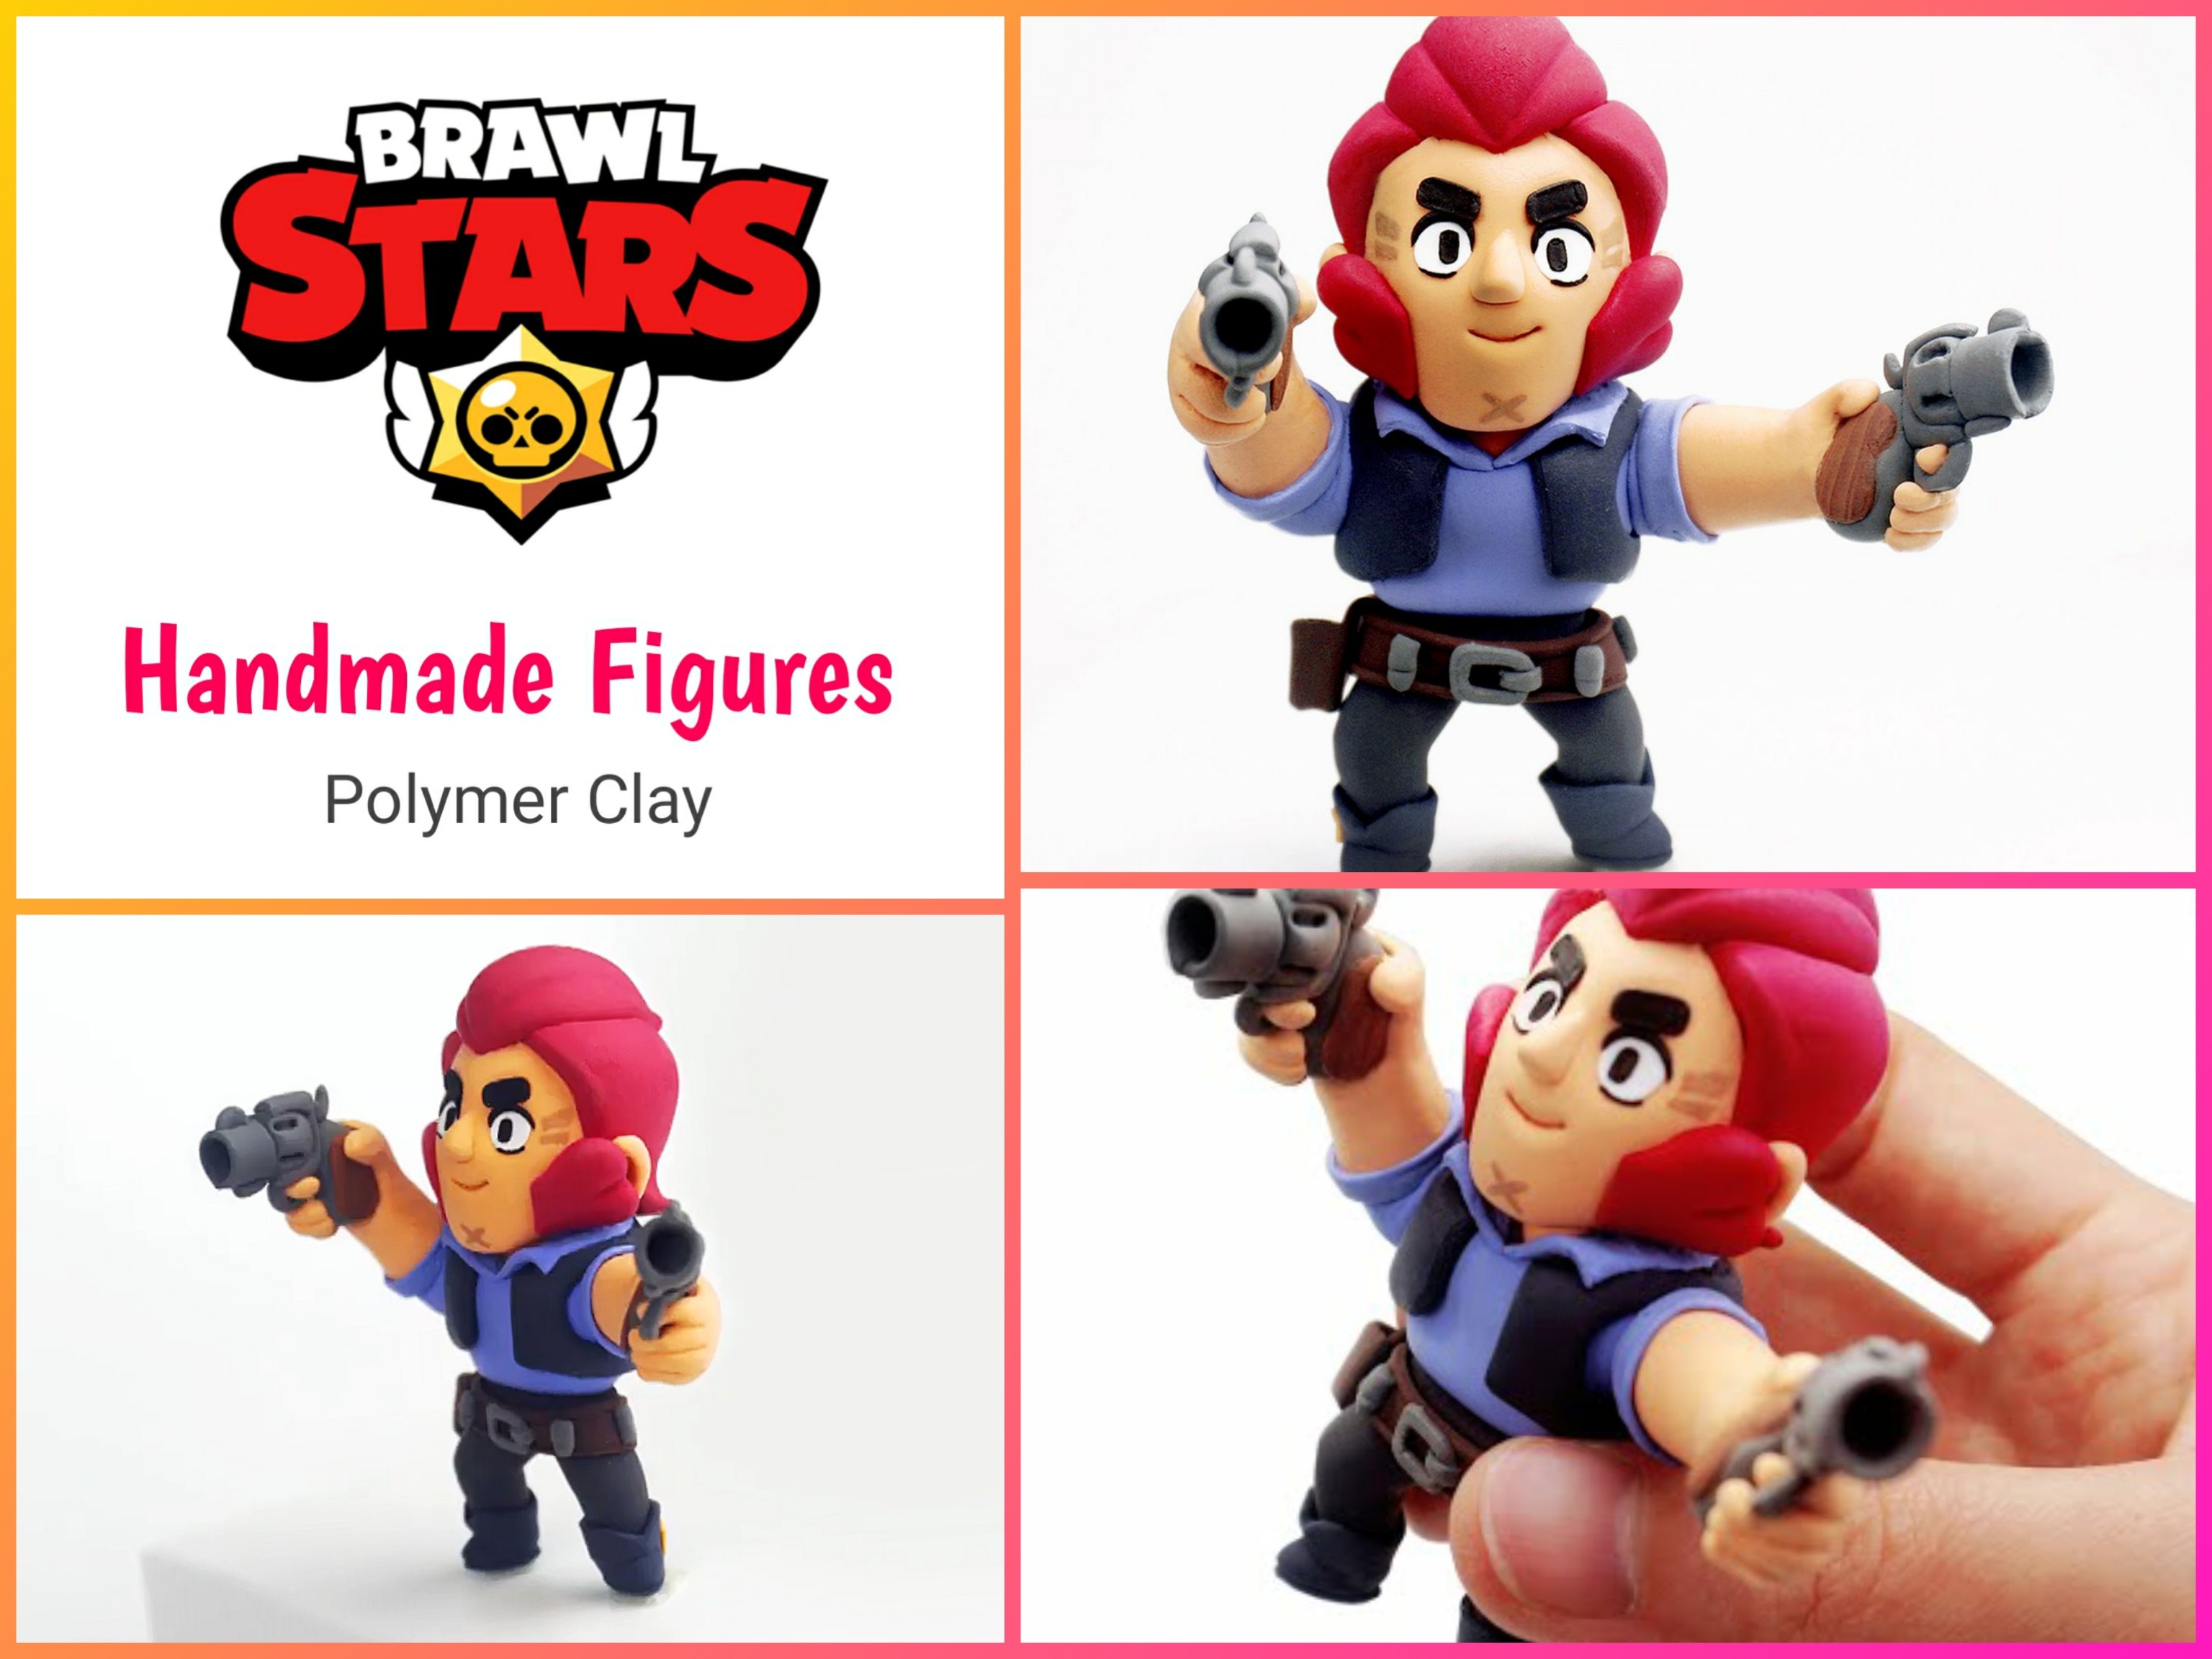 Brawl Stars Figures Handmade With Polymer Clay Several Options Available - brawl stars skins para comprar